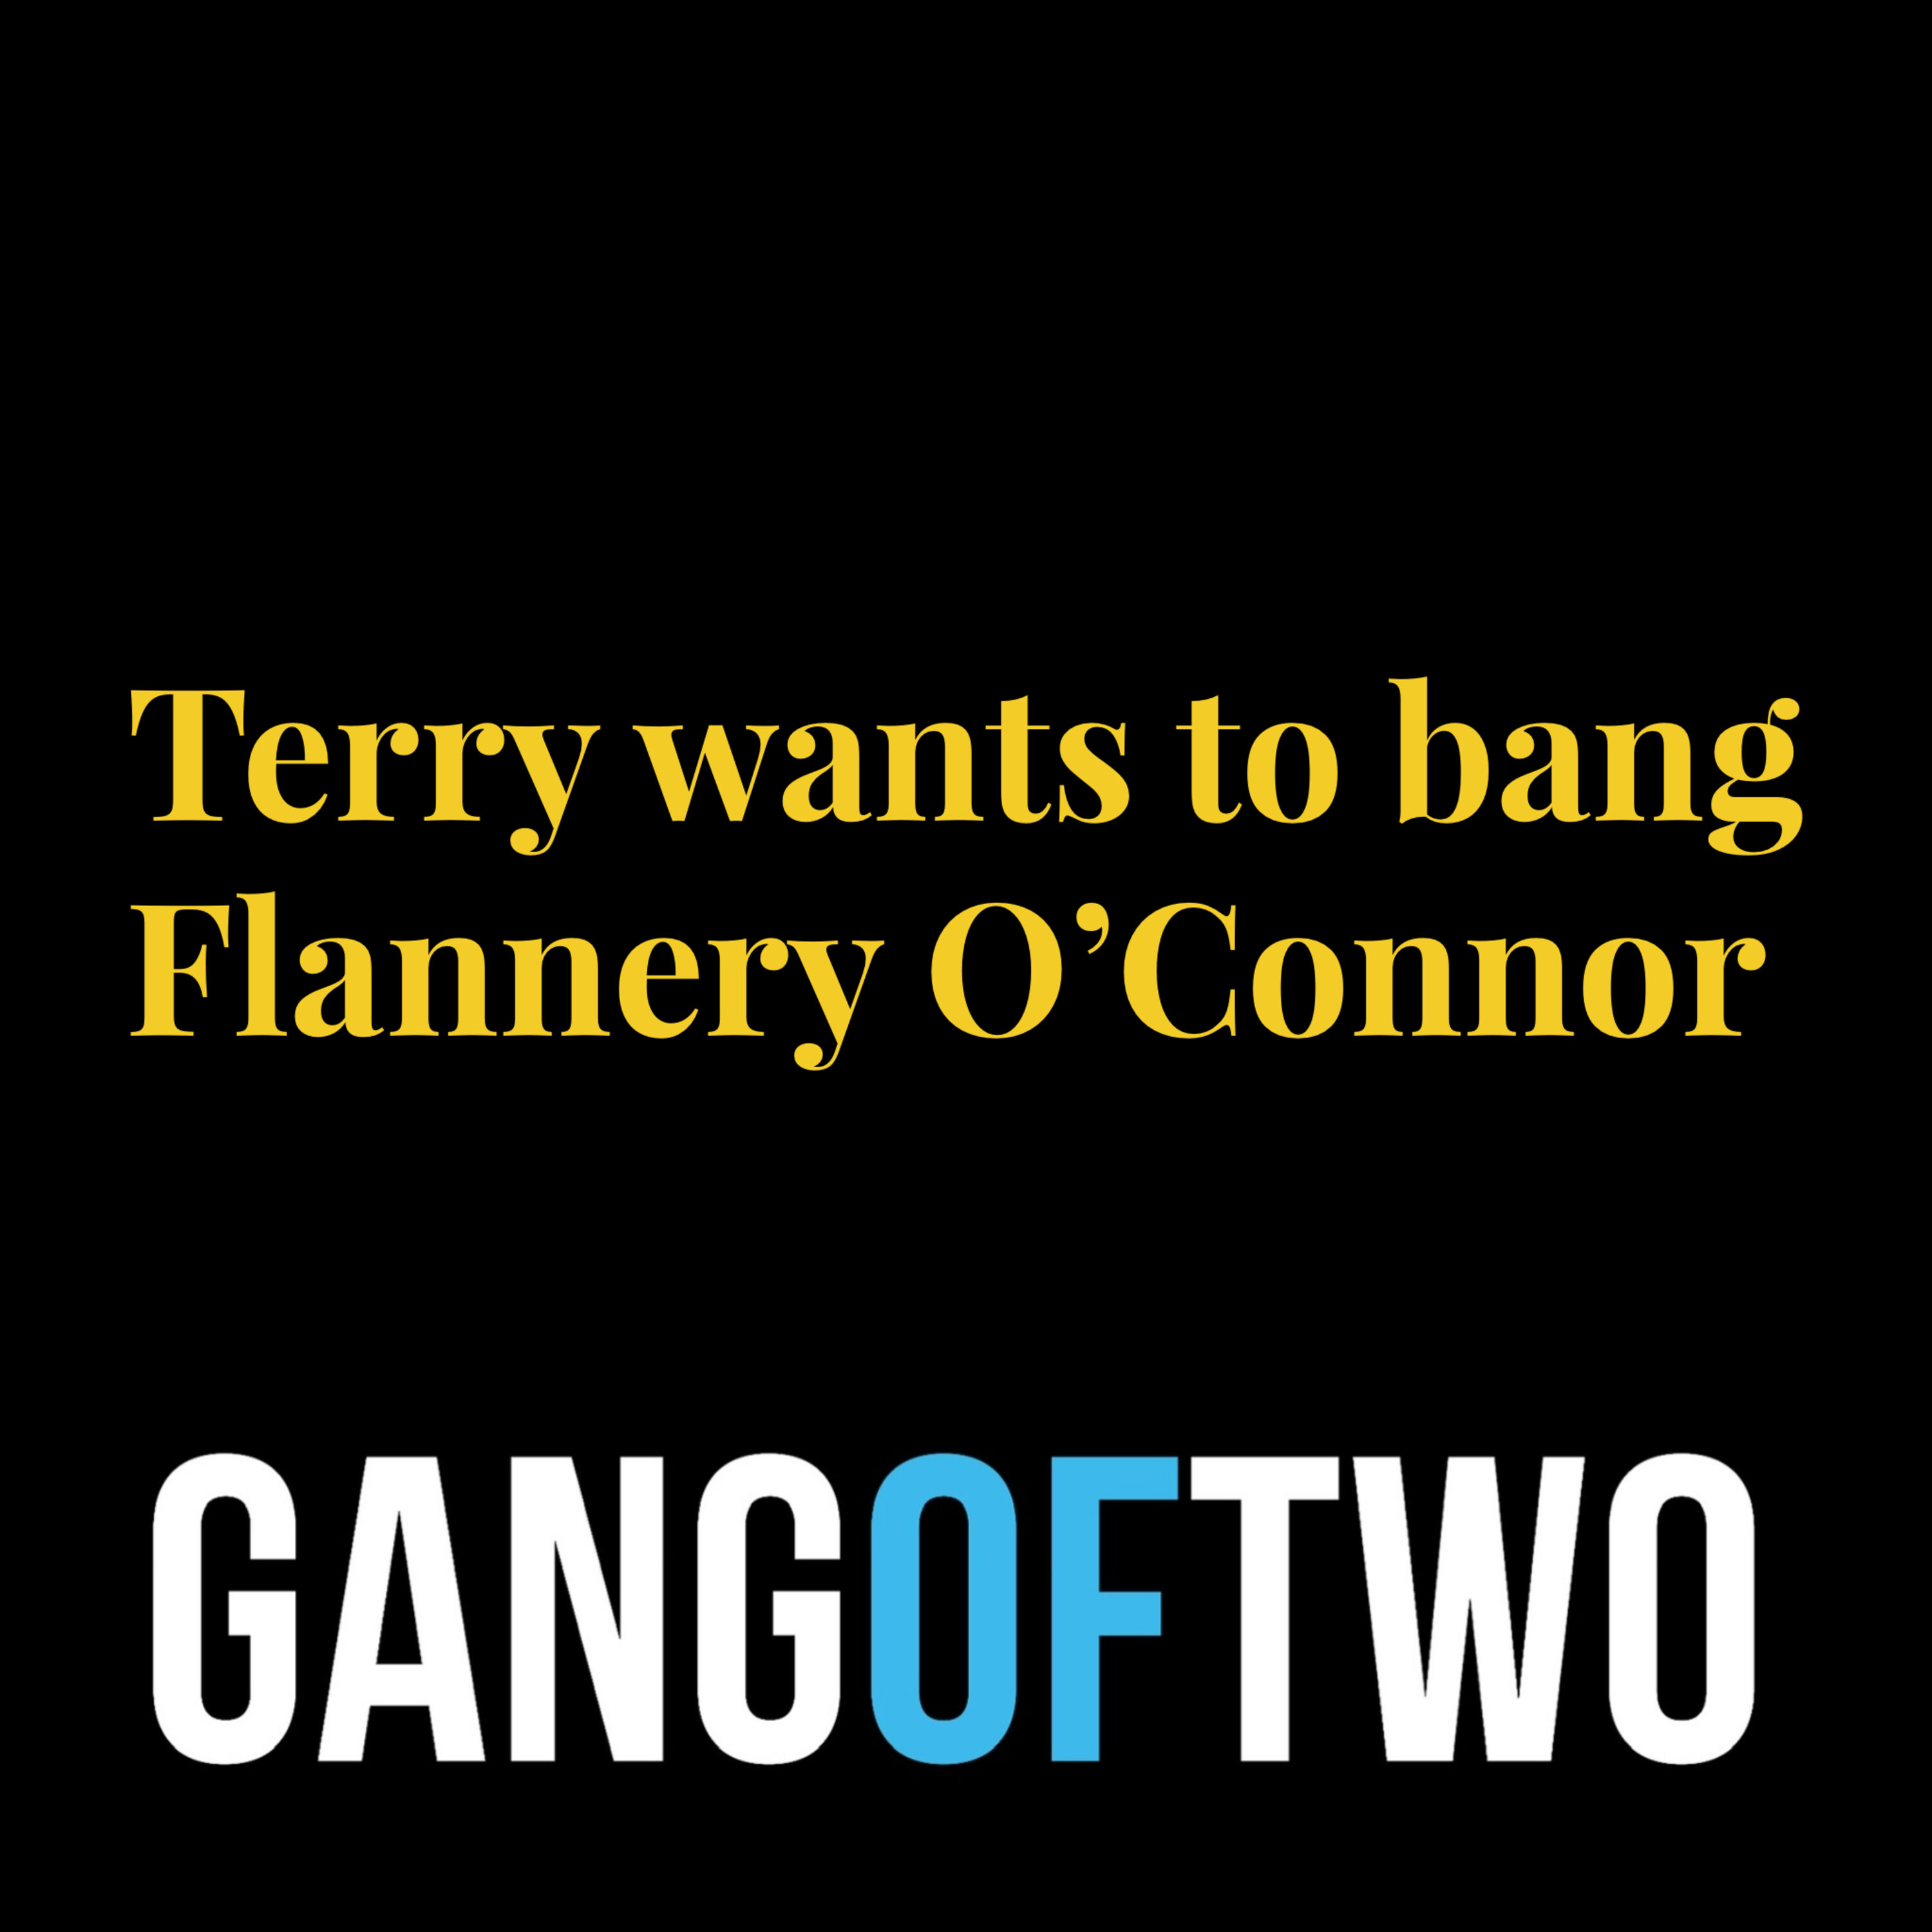 TERRY WANTS TO BANG FLANNERY O'CONNOR